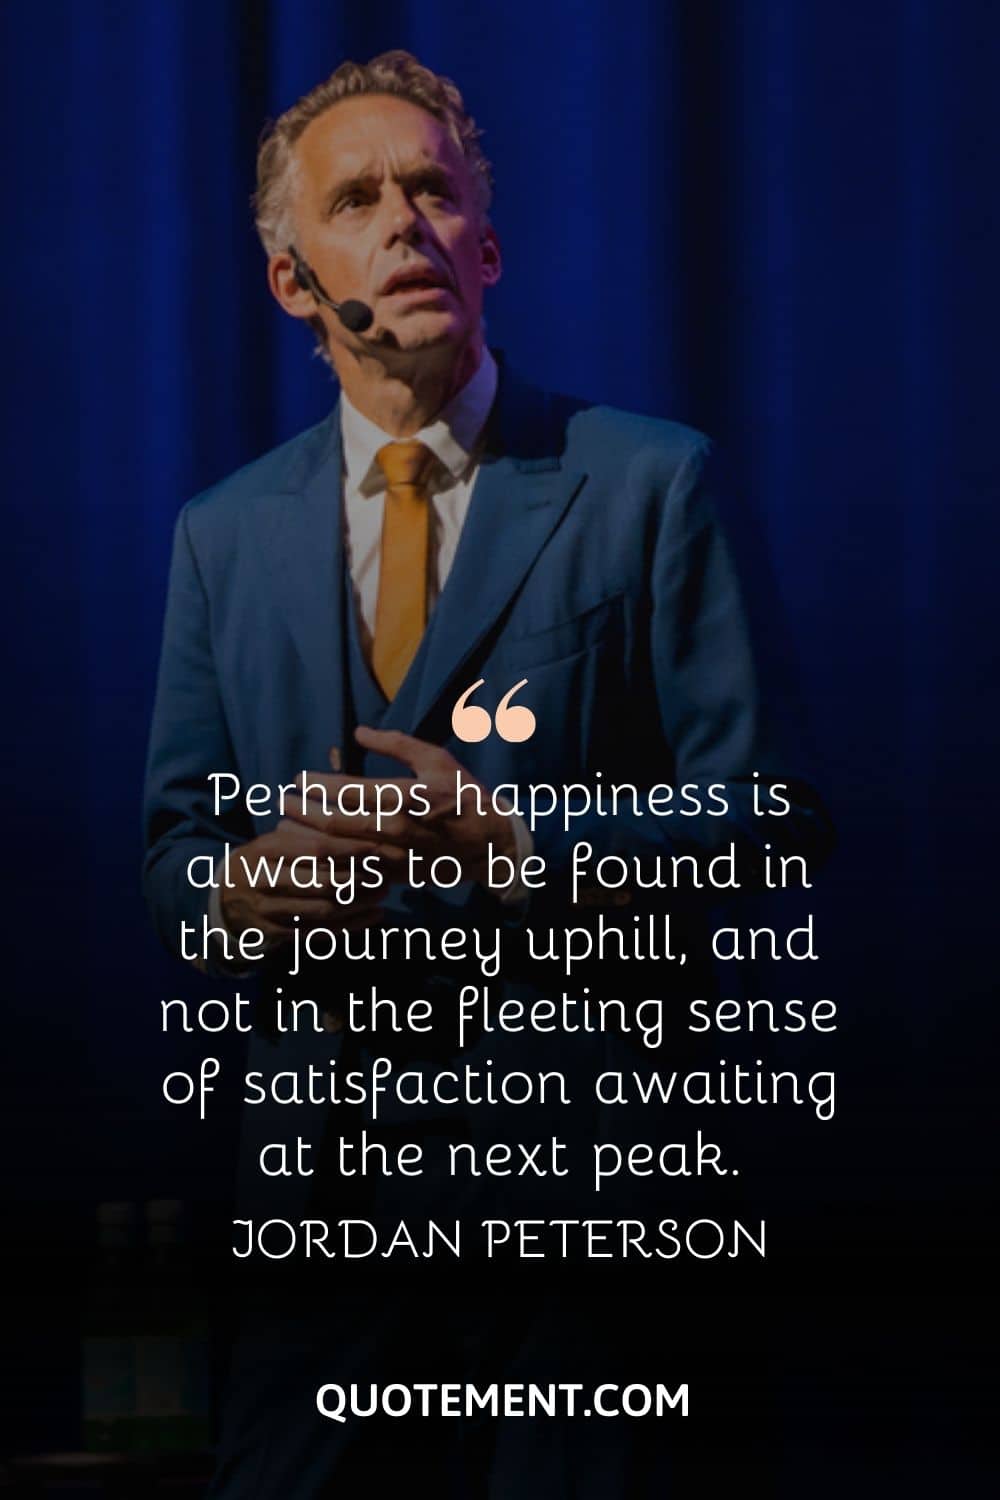 “Perhaps happiness is always to be found in the journey uphill, and not in the fleeting sense of satisfaction awaiting at the next peak.” — Jordan Peterson